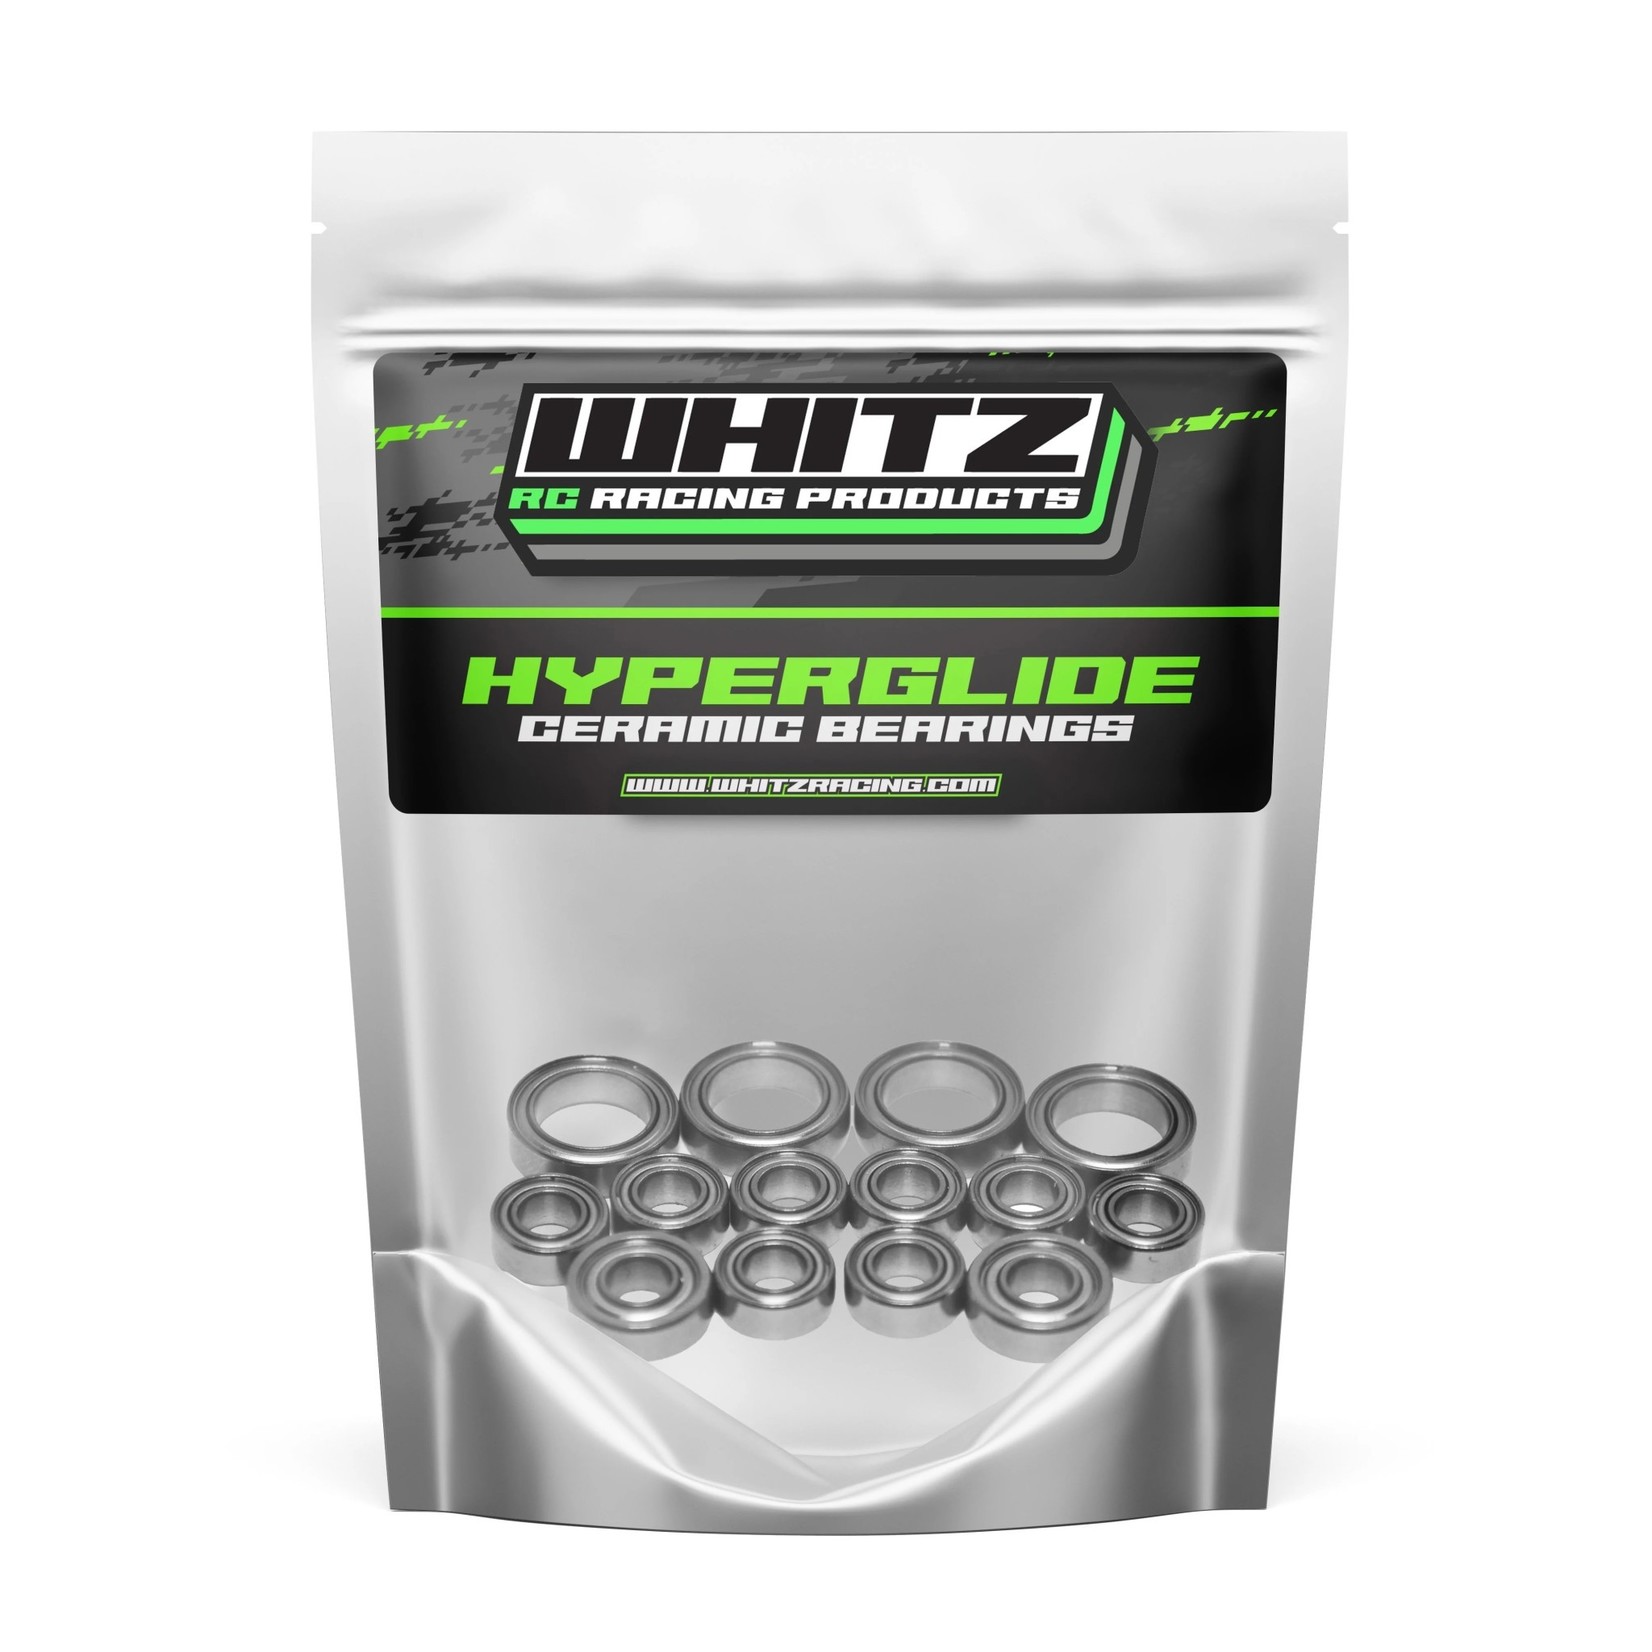 Whitz WRP-TLR225E-HGFK Whitz Racing Products 22 5.0 Elite Full